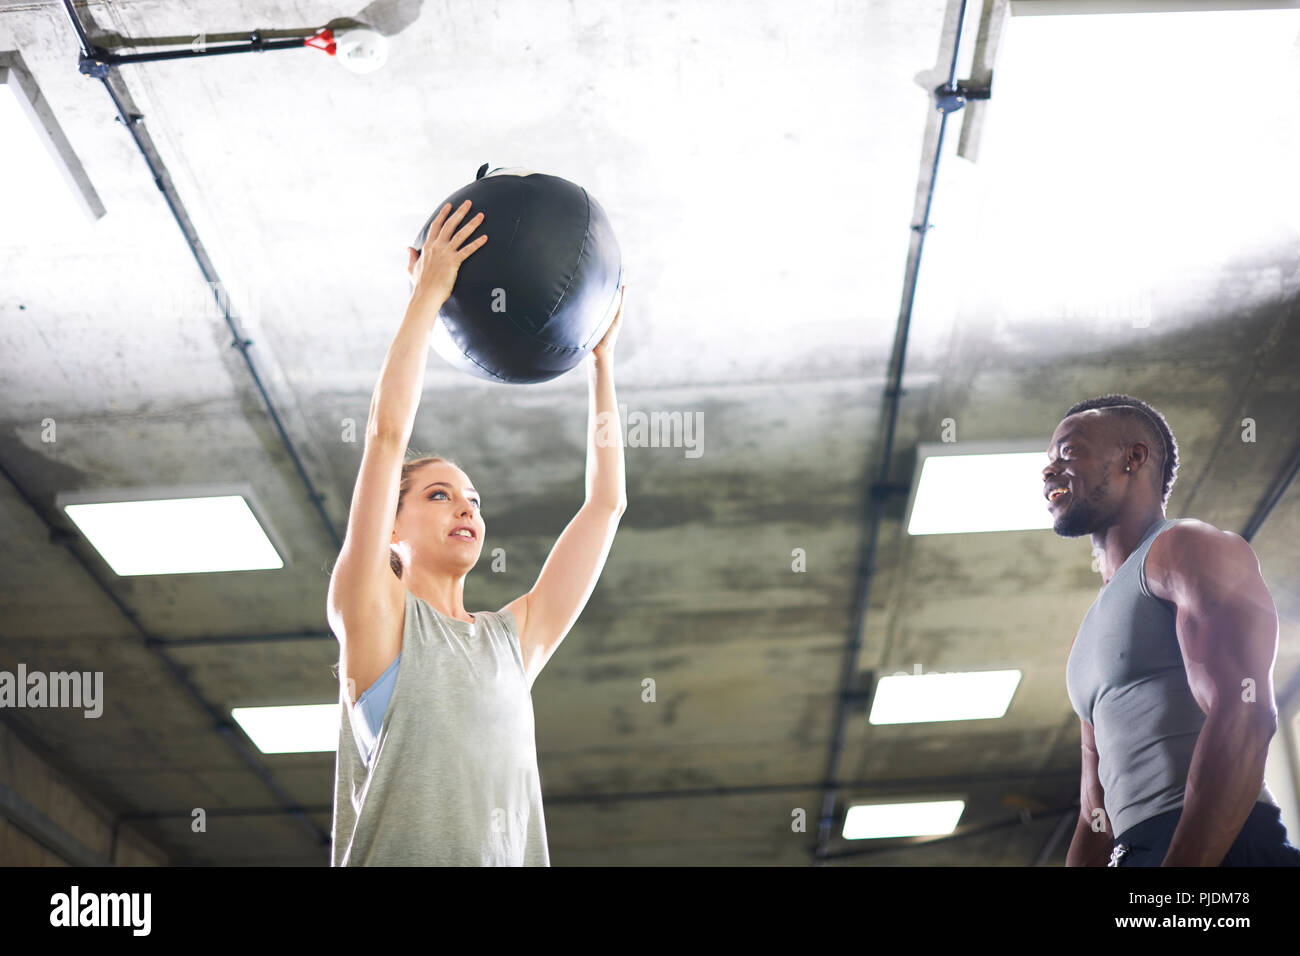 Trainer watching female client lift medicine ball in gym Stock Photo